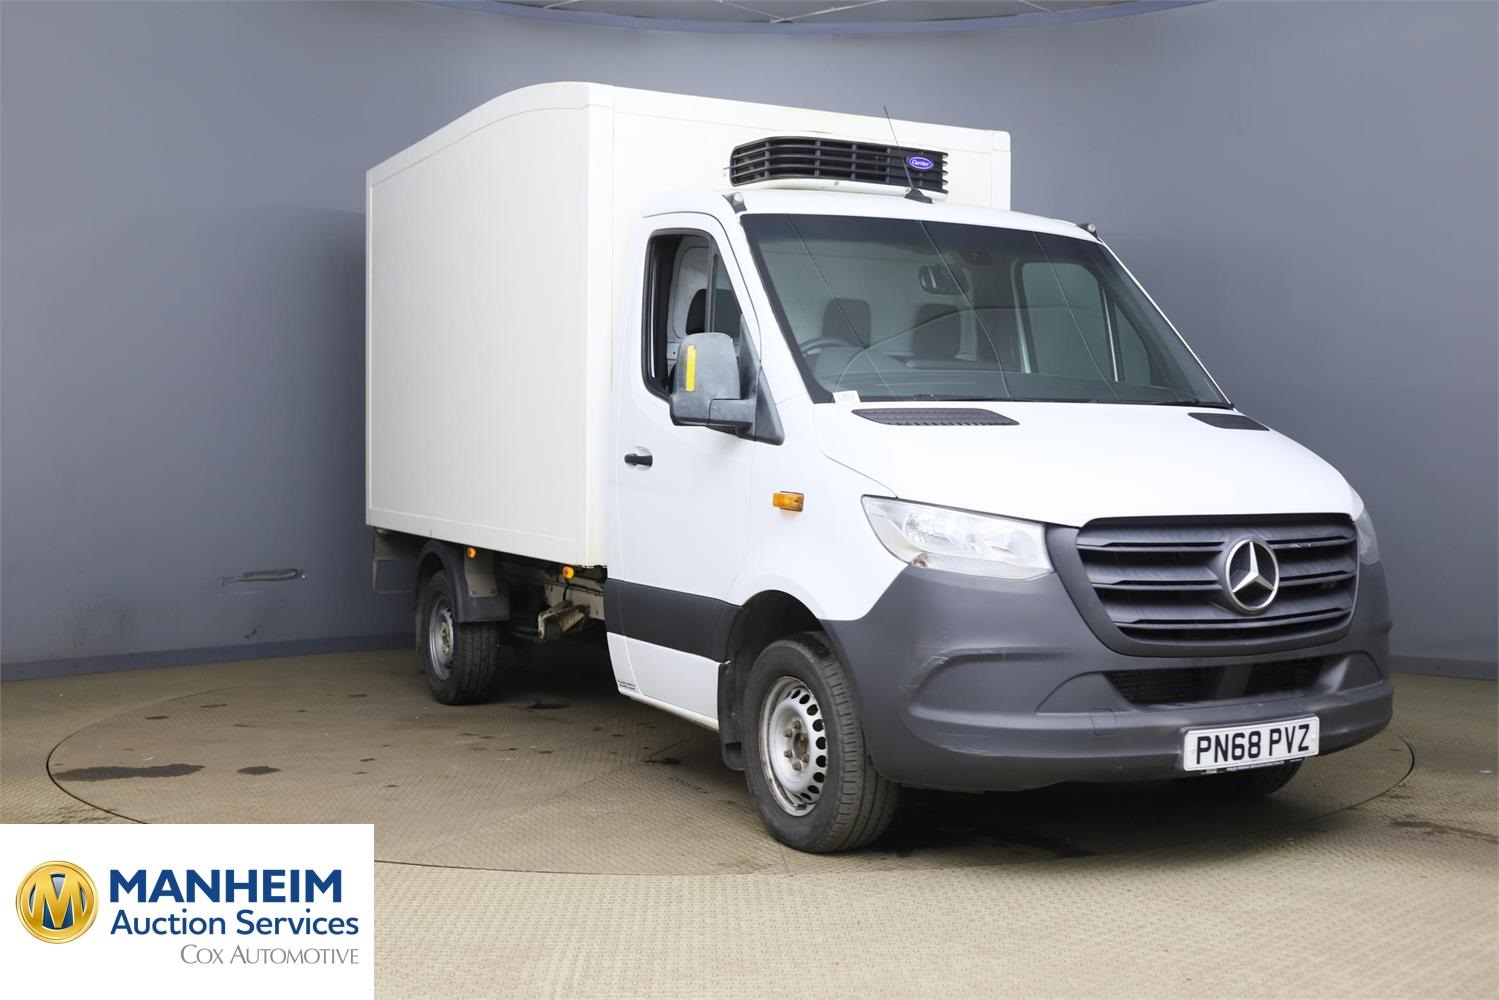 MERCEDES-BENZ
SPRINTER 314CDI L2 DIESEL RWD
3.5t Chassis Cab 7G-Tronic